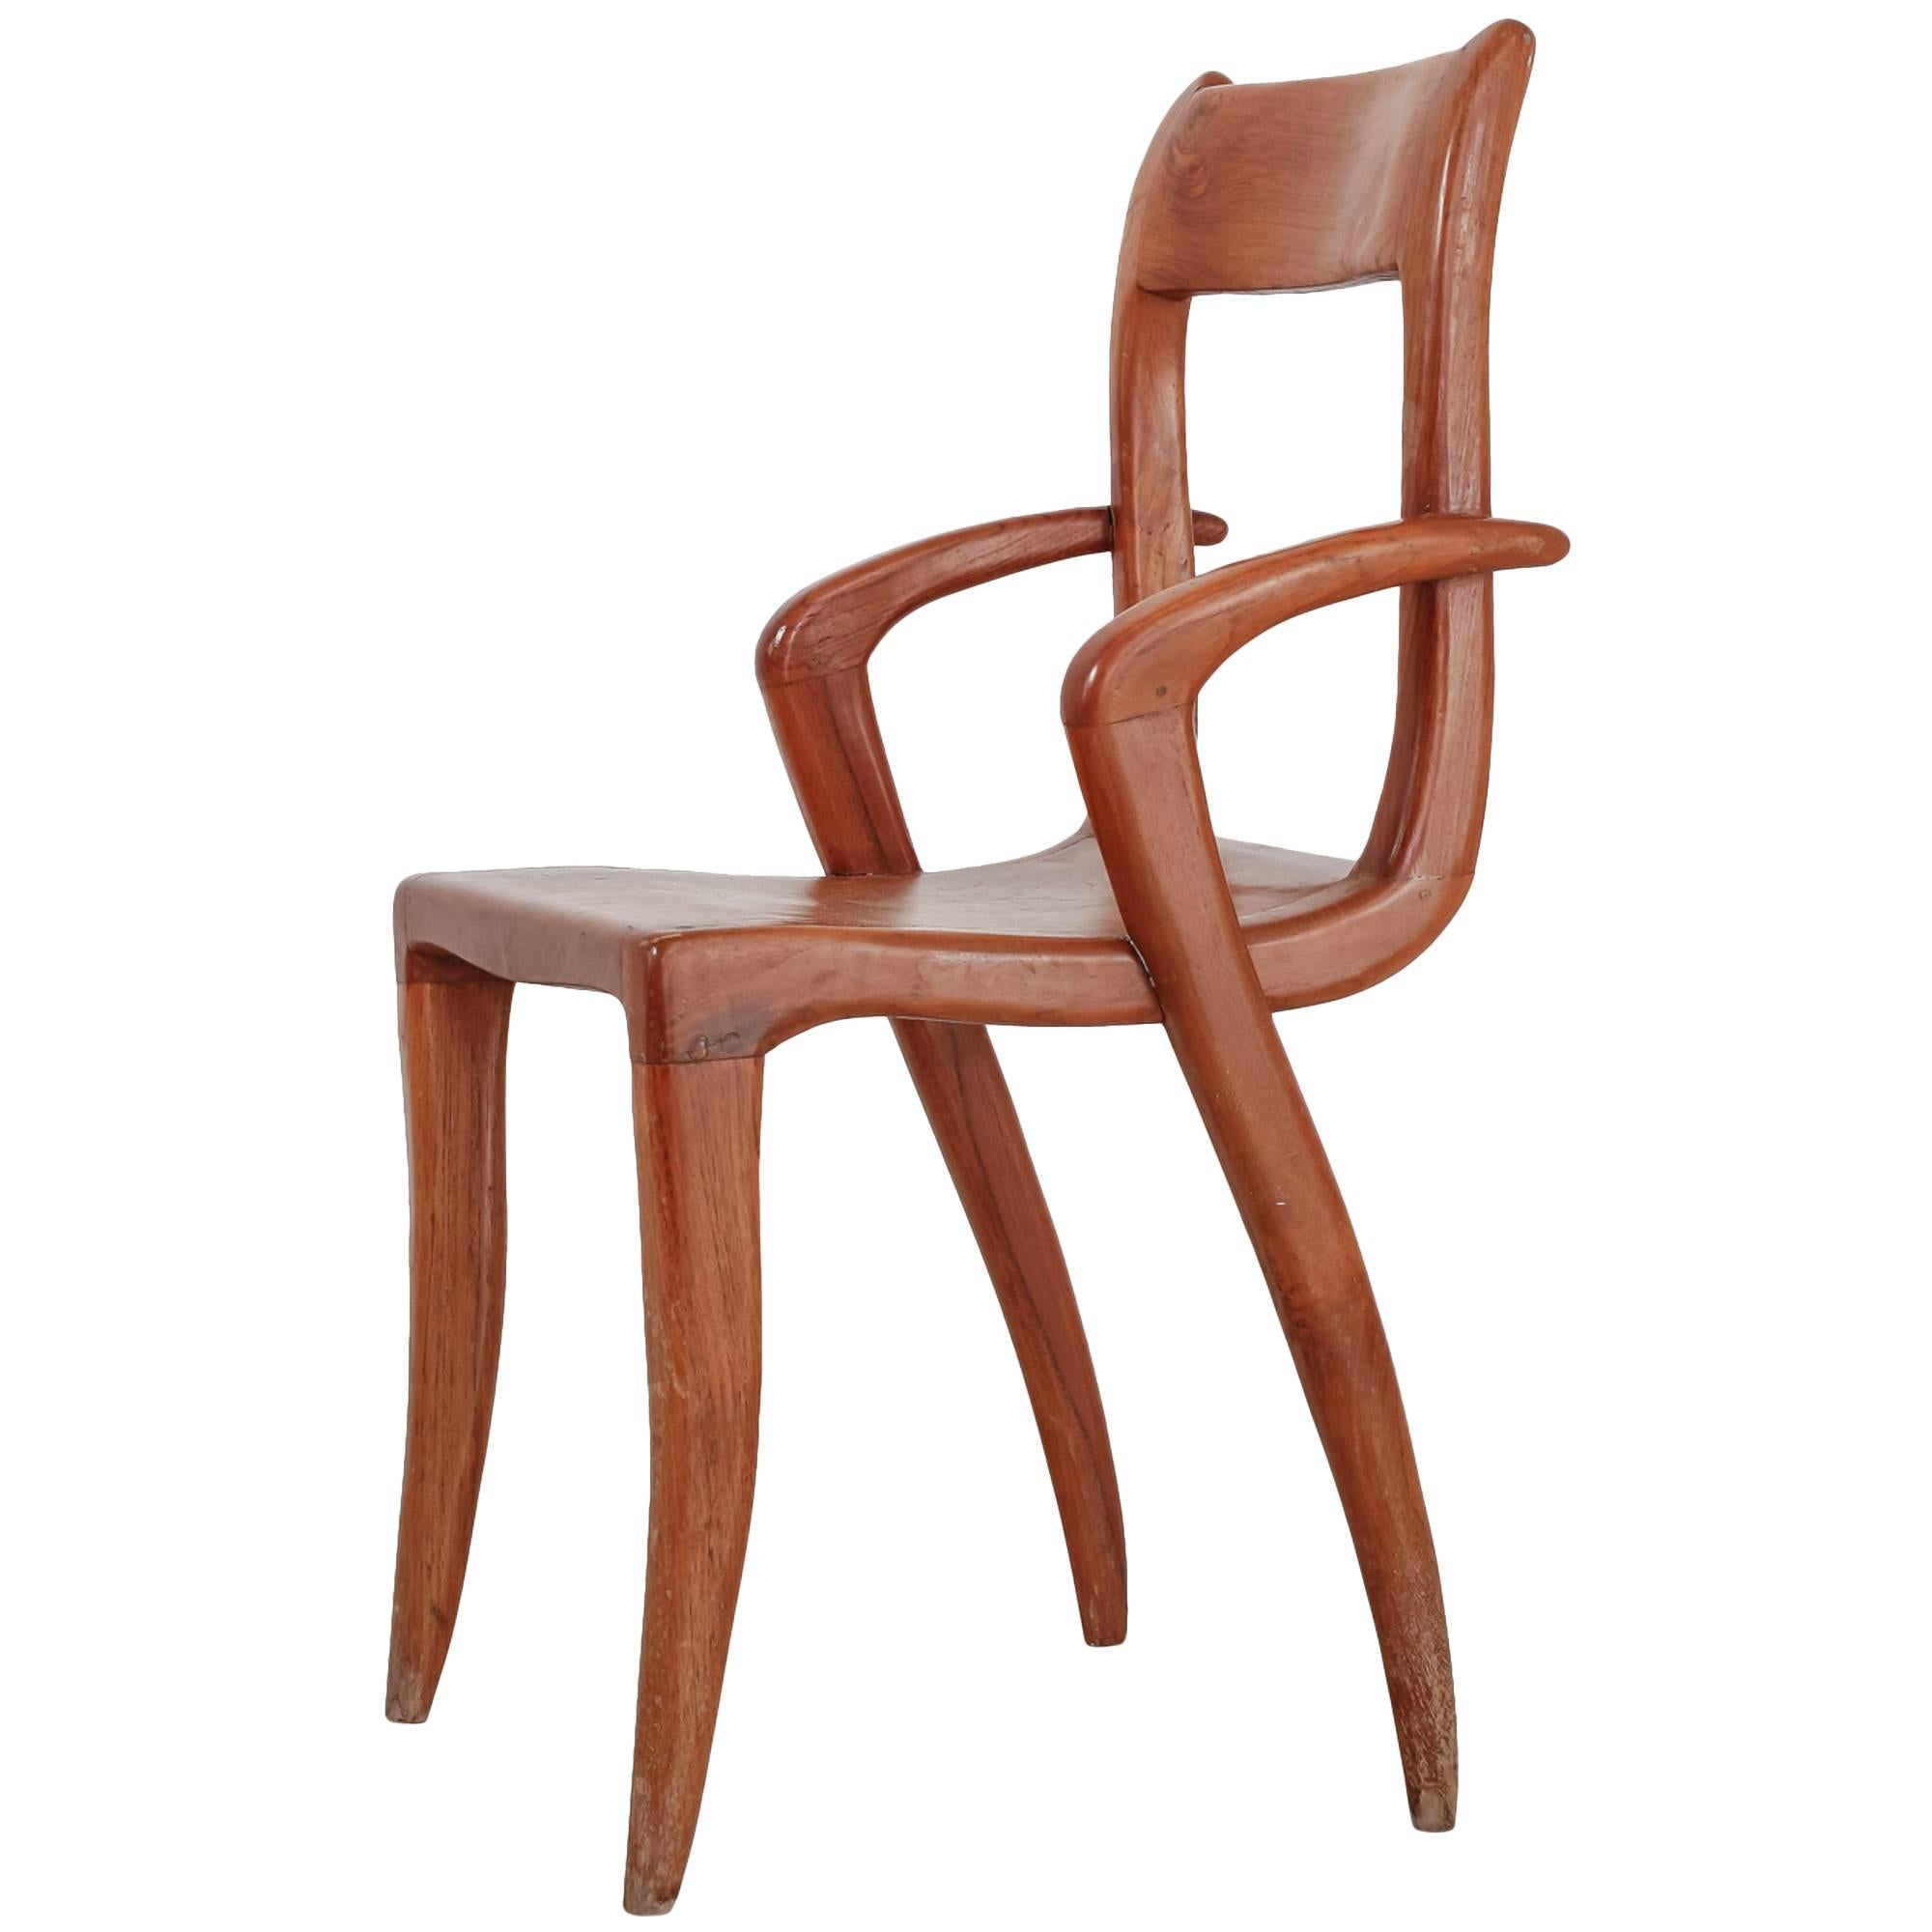 American Sculptural, Organic Wooden Craft Chair, 1950s For Sale